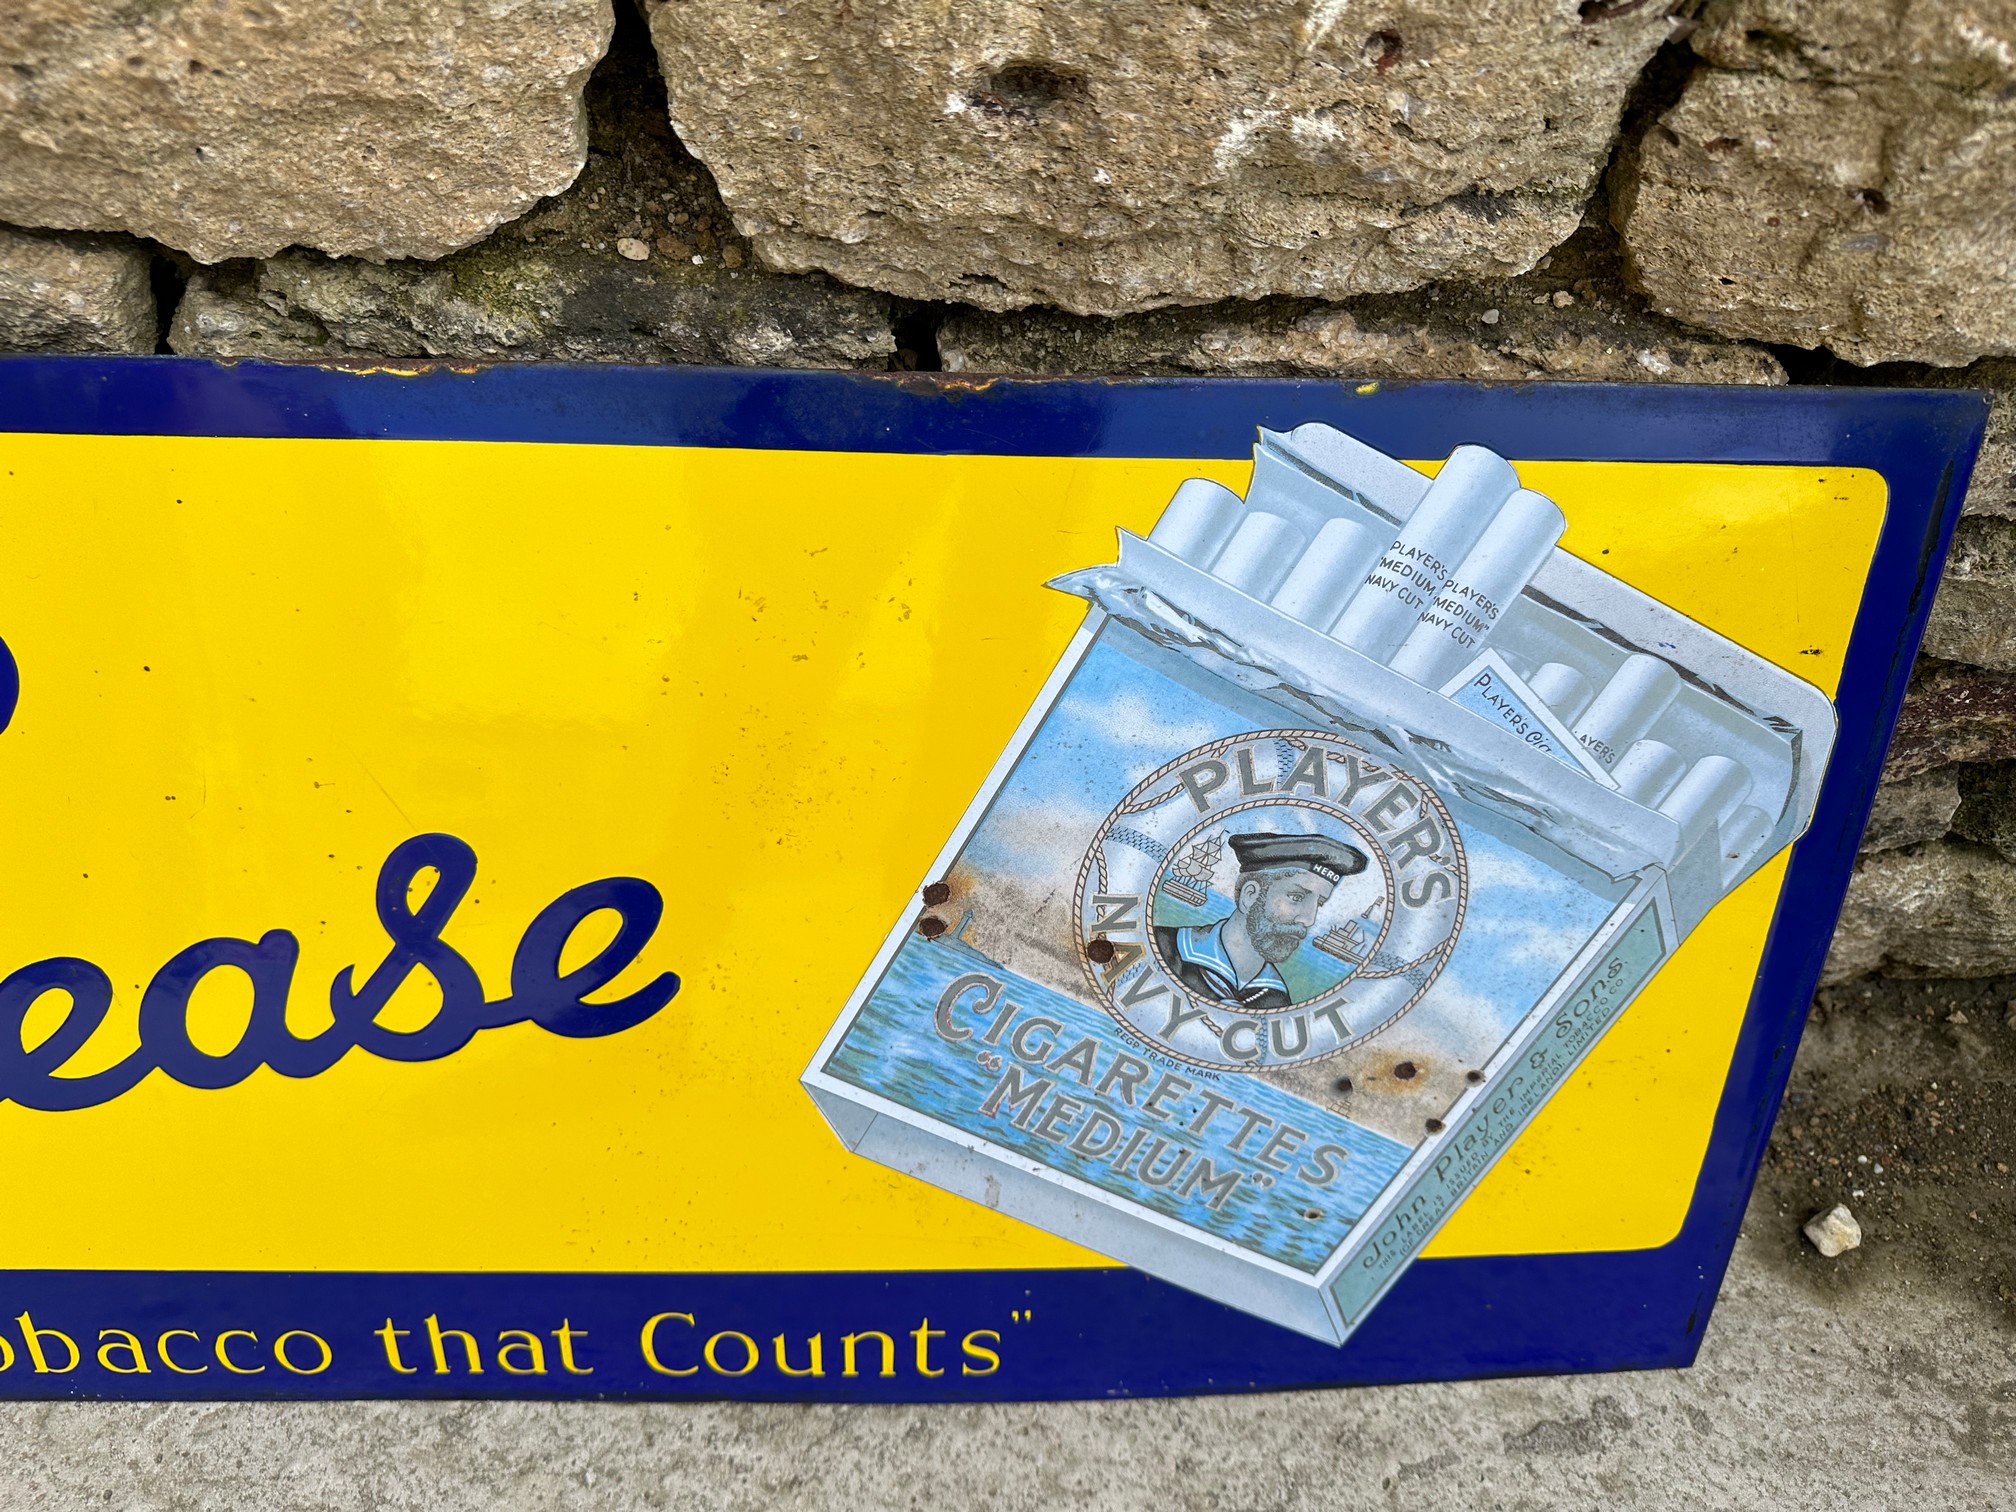 A Player's Please 'It's the Tobacco that Counts' enamel advertising sign, 45 x 16". - Image 4 of 4